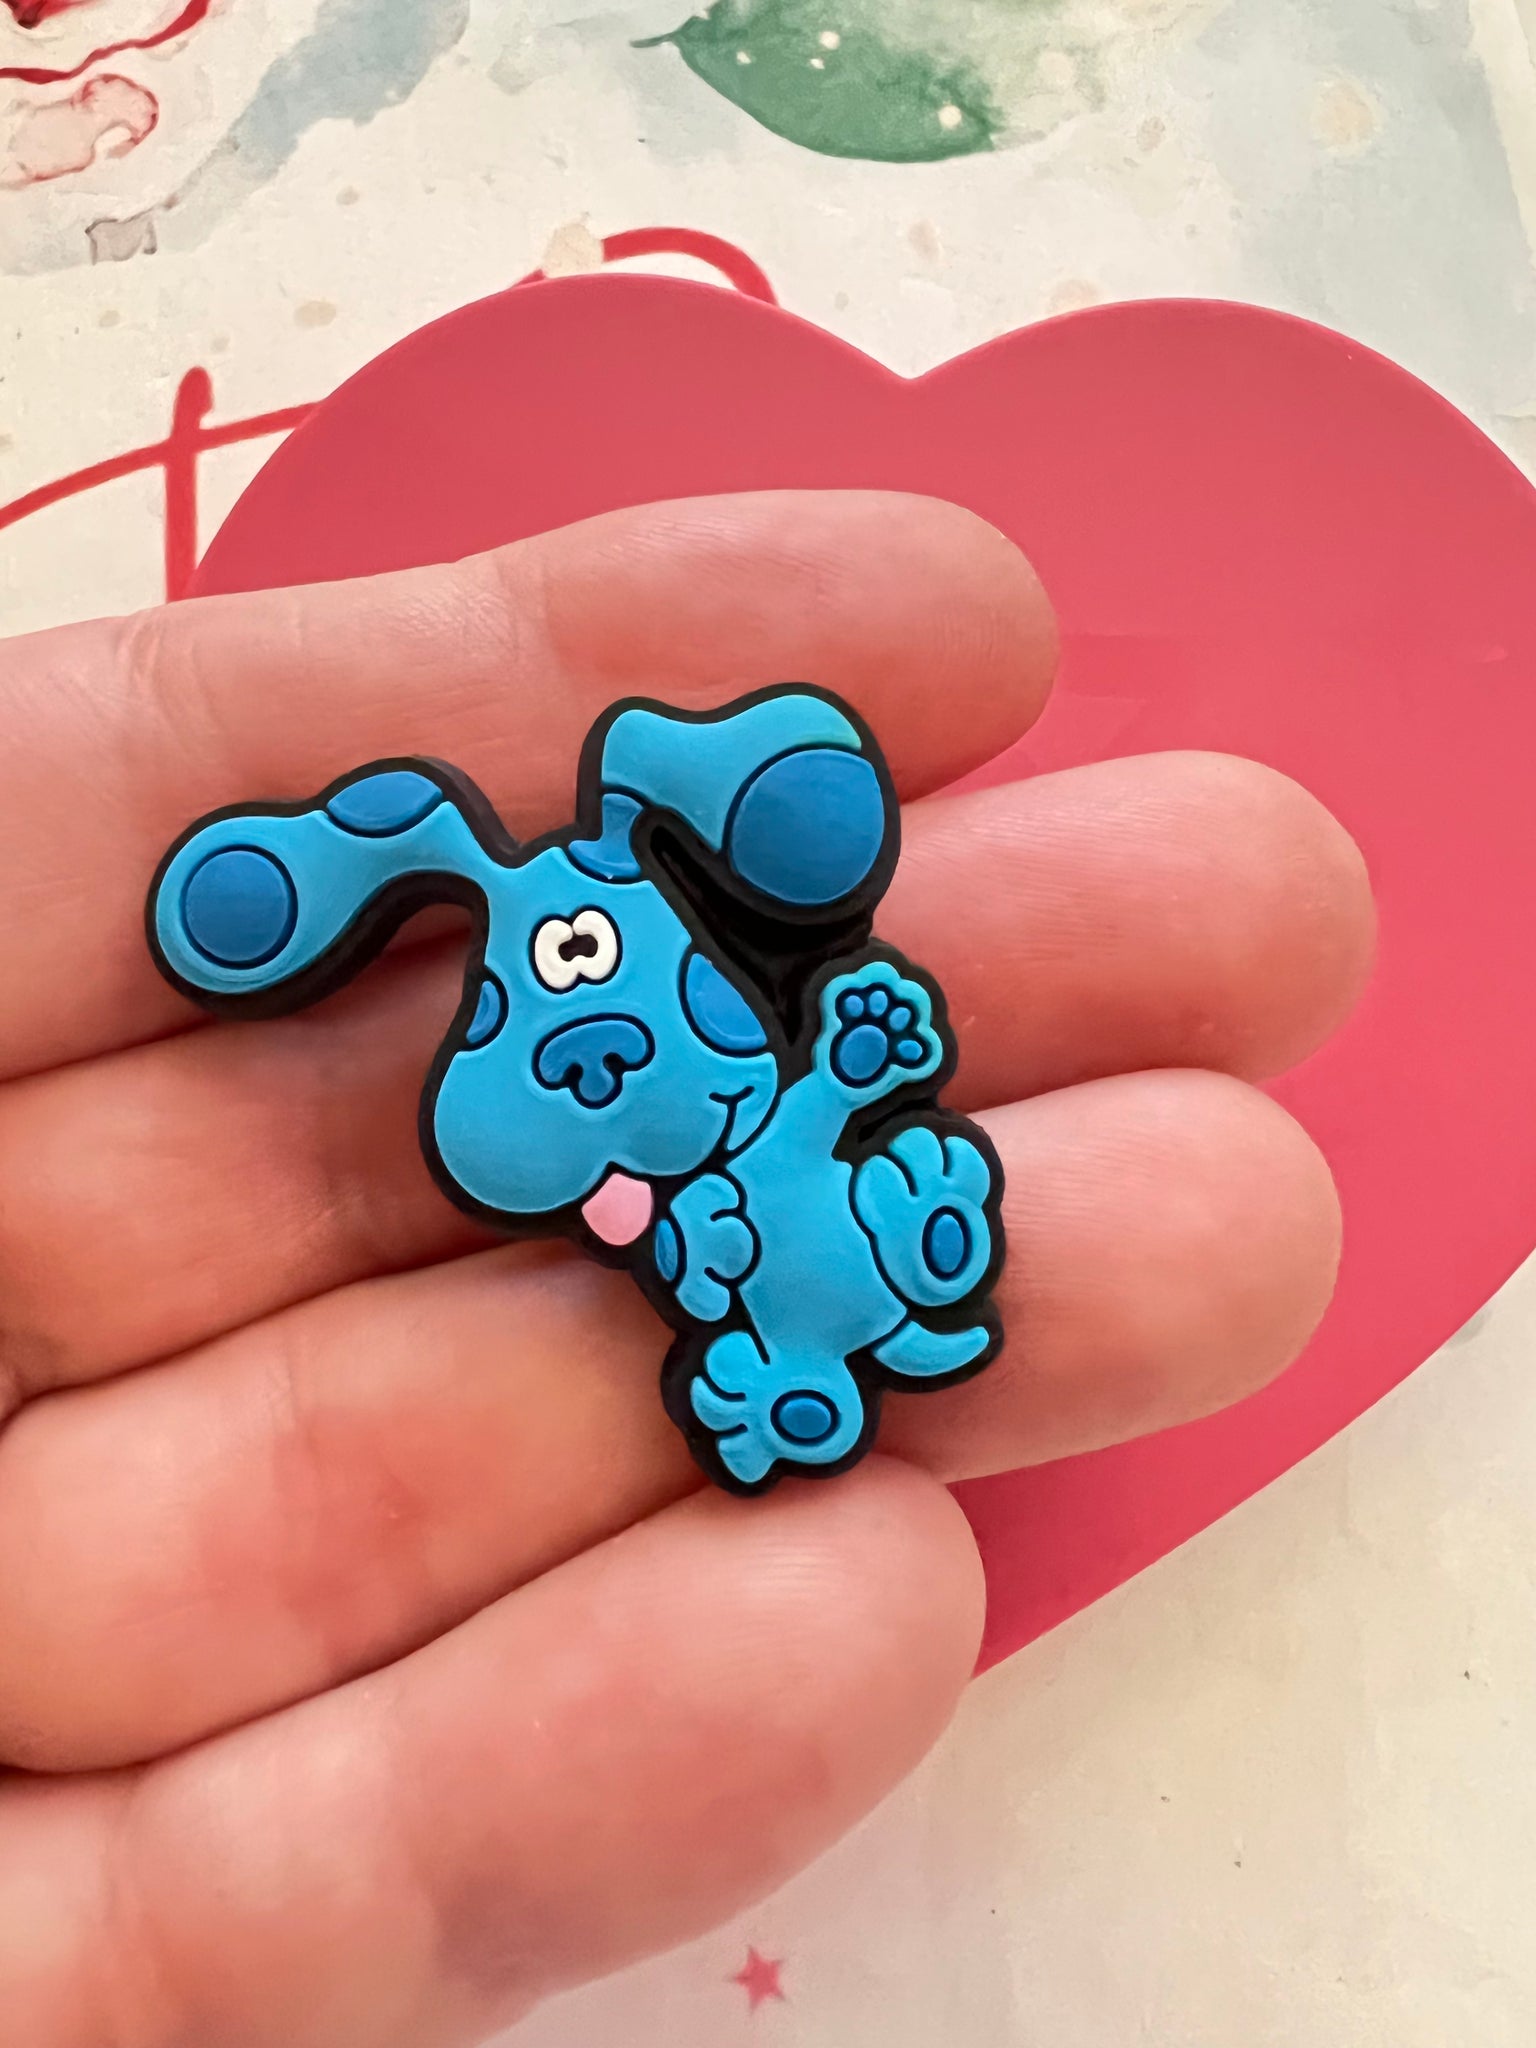 Blues Clues inspired charm